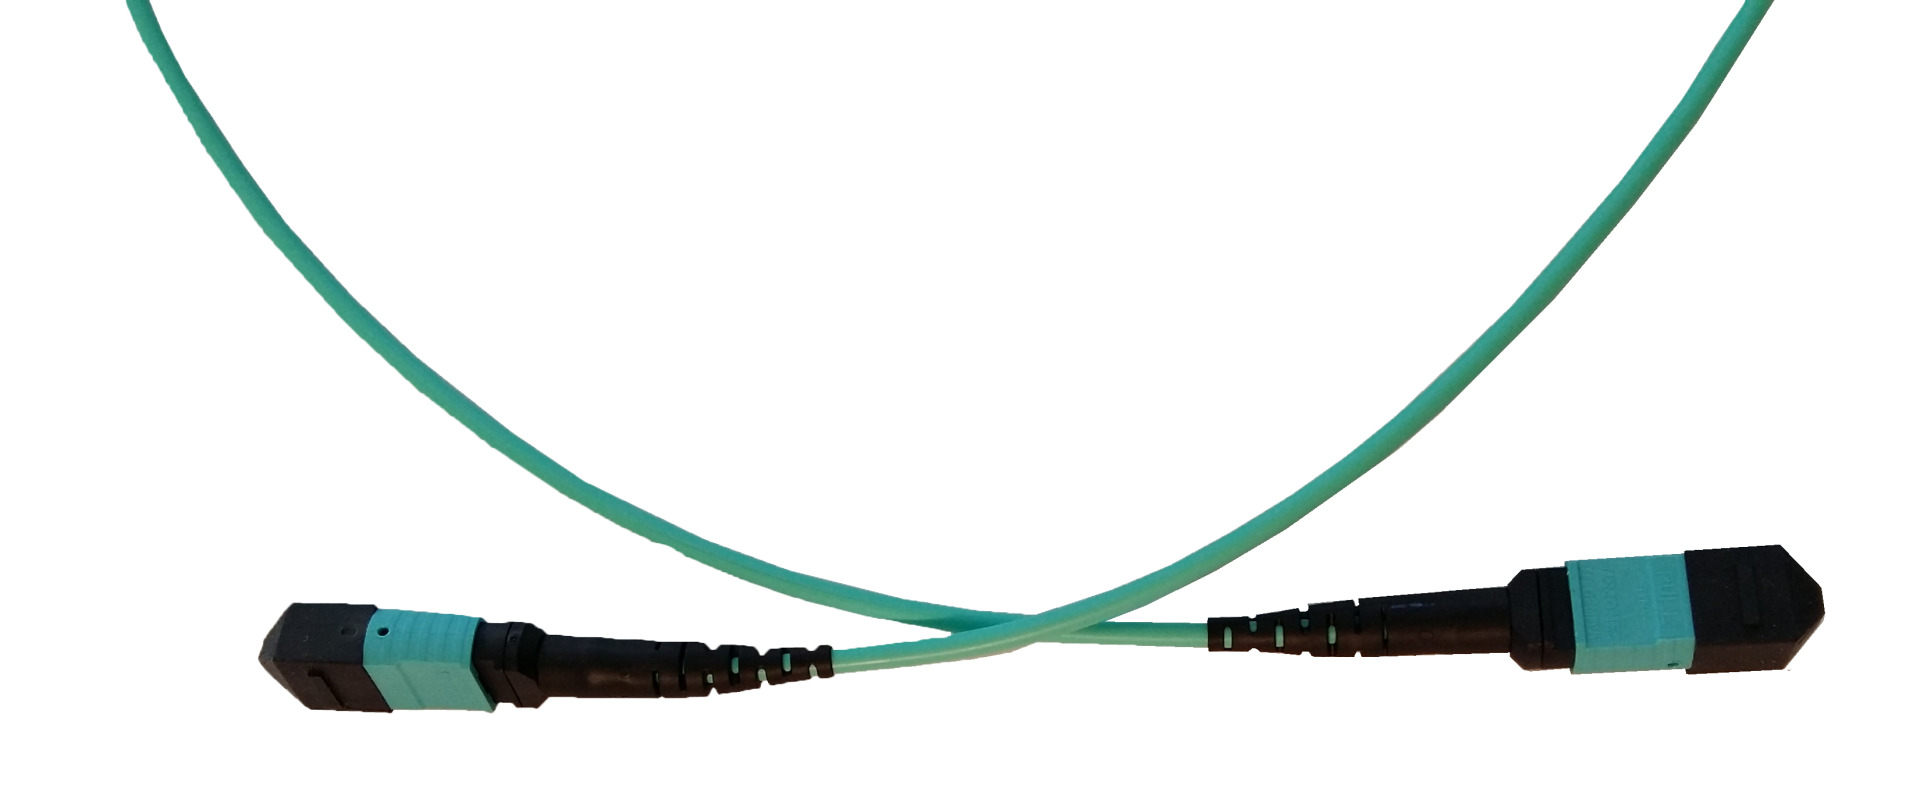 MTP/MPO Trunkcable 12 fiber MM OM3, 12m,Turquise, dobb.jacket OD=4,5mm 